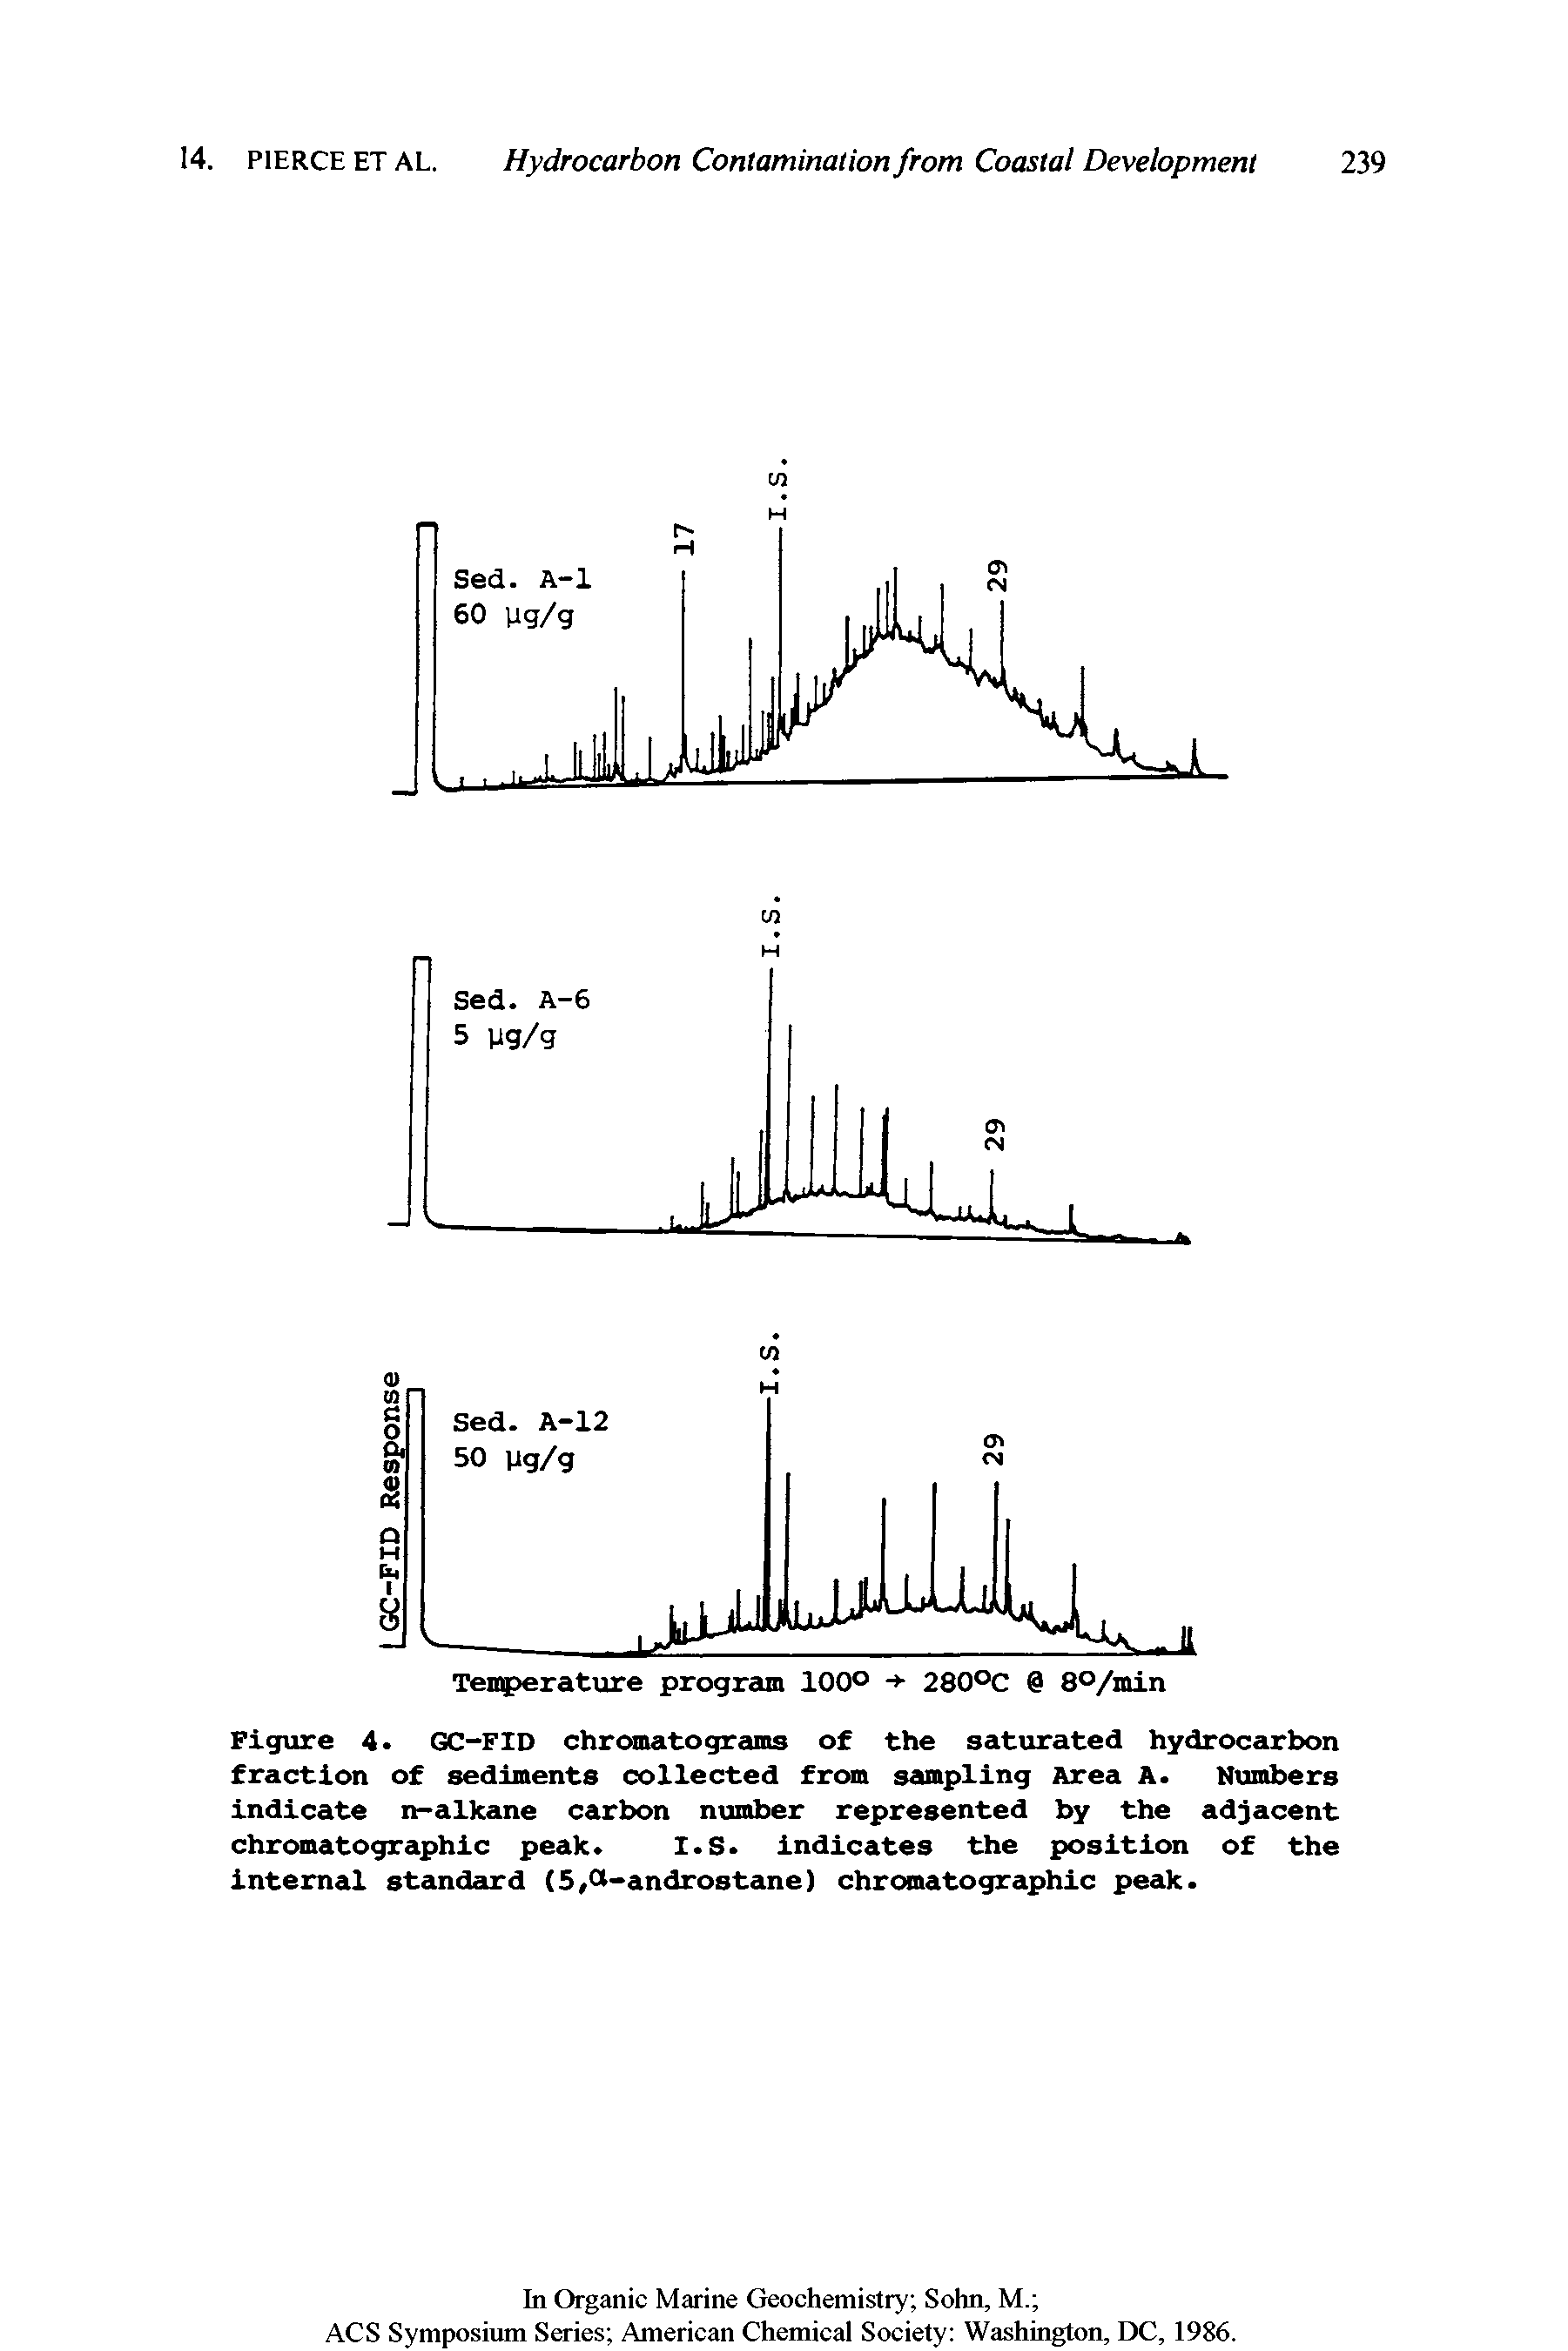 Figure 4 GC-FID chromatograms of the saturated hydrocarbon fraction of sediments collected from sampling Area A. Numbers indicate n-alkane carbon number represented by the adjacent chromatographic peak. I.S. indicates the position of the internal standard (5,Ct-androstane) chromatographic peak.